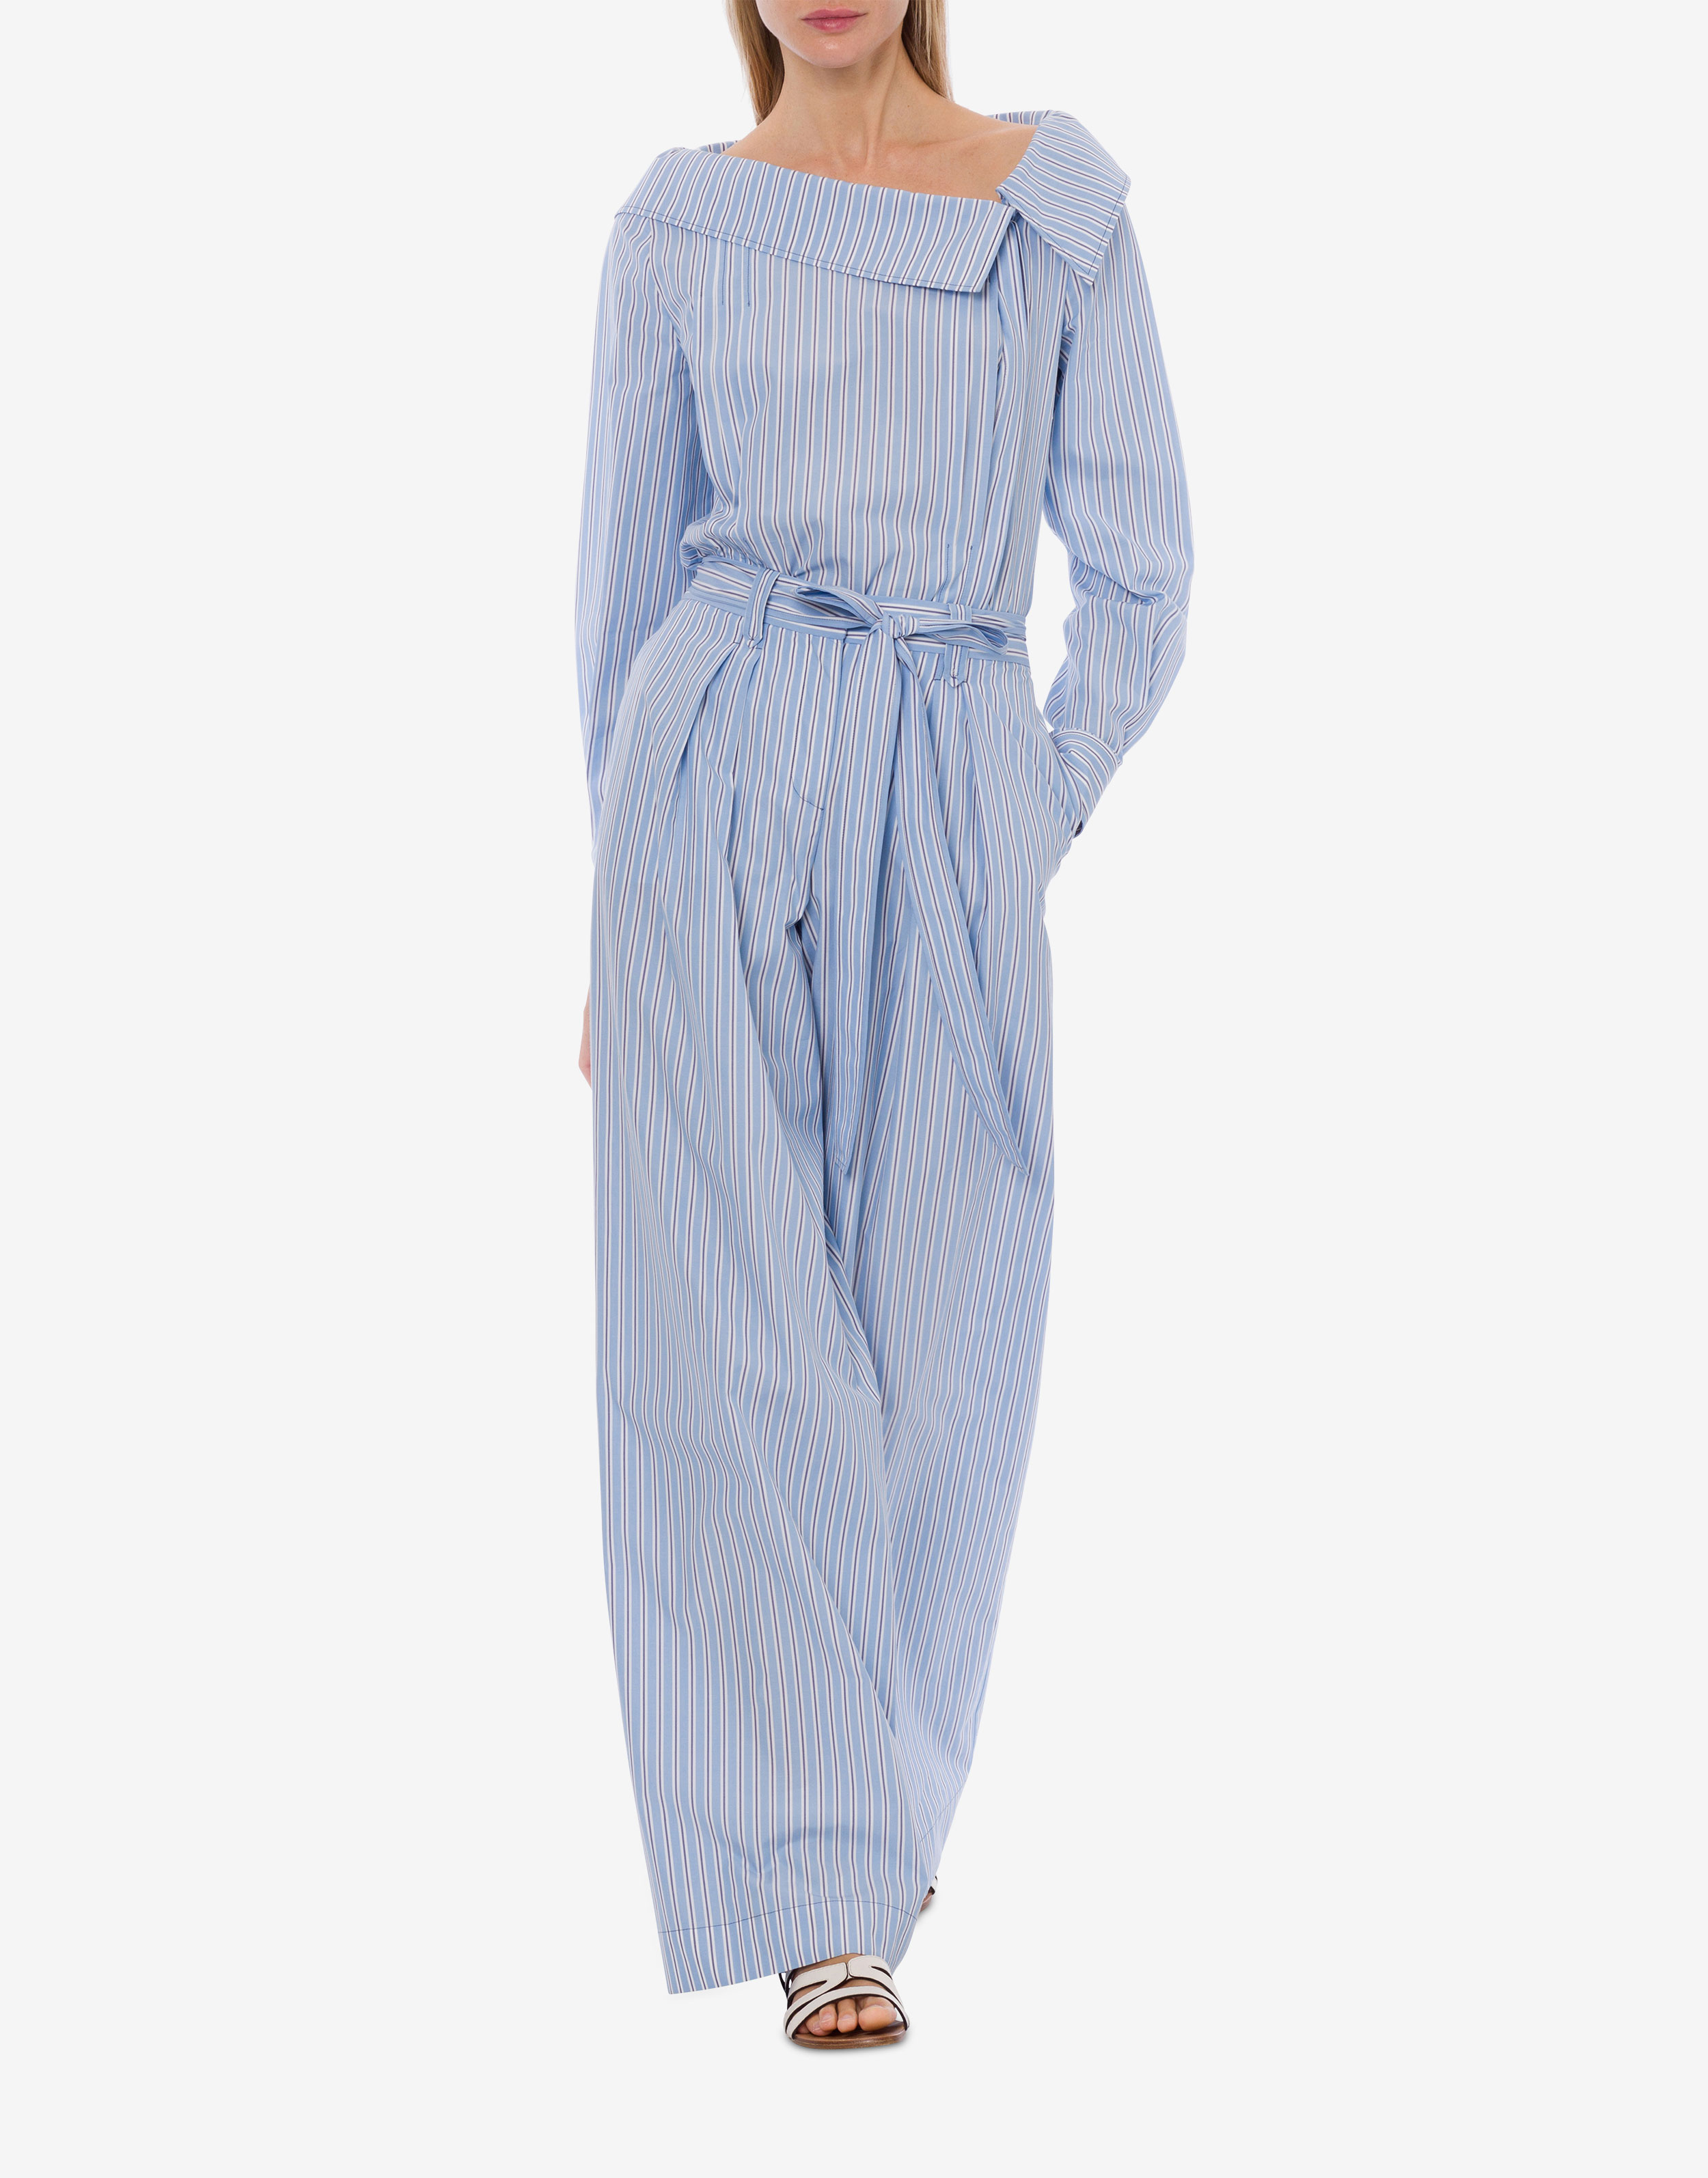 Jumpsuit in striped poplin with sash